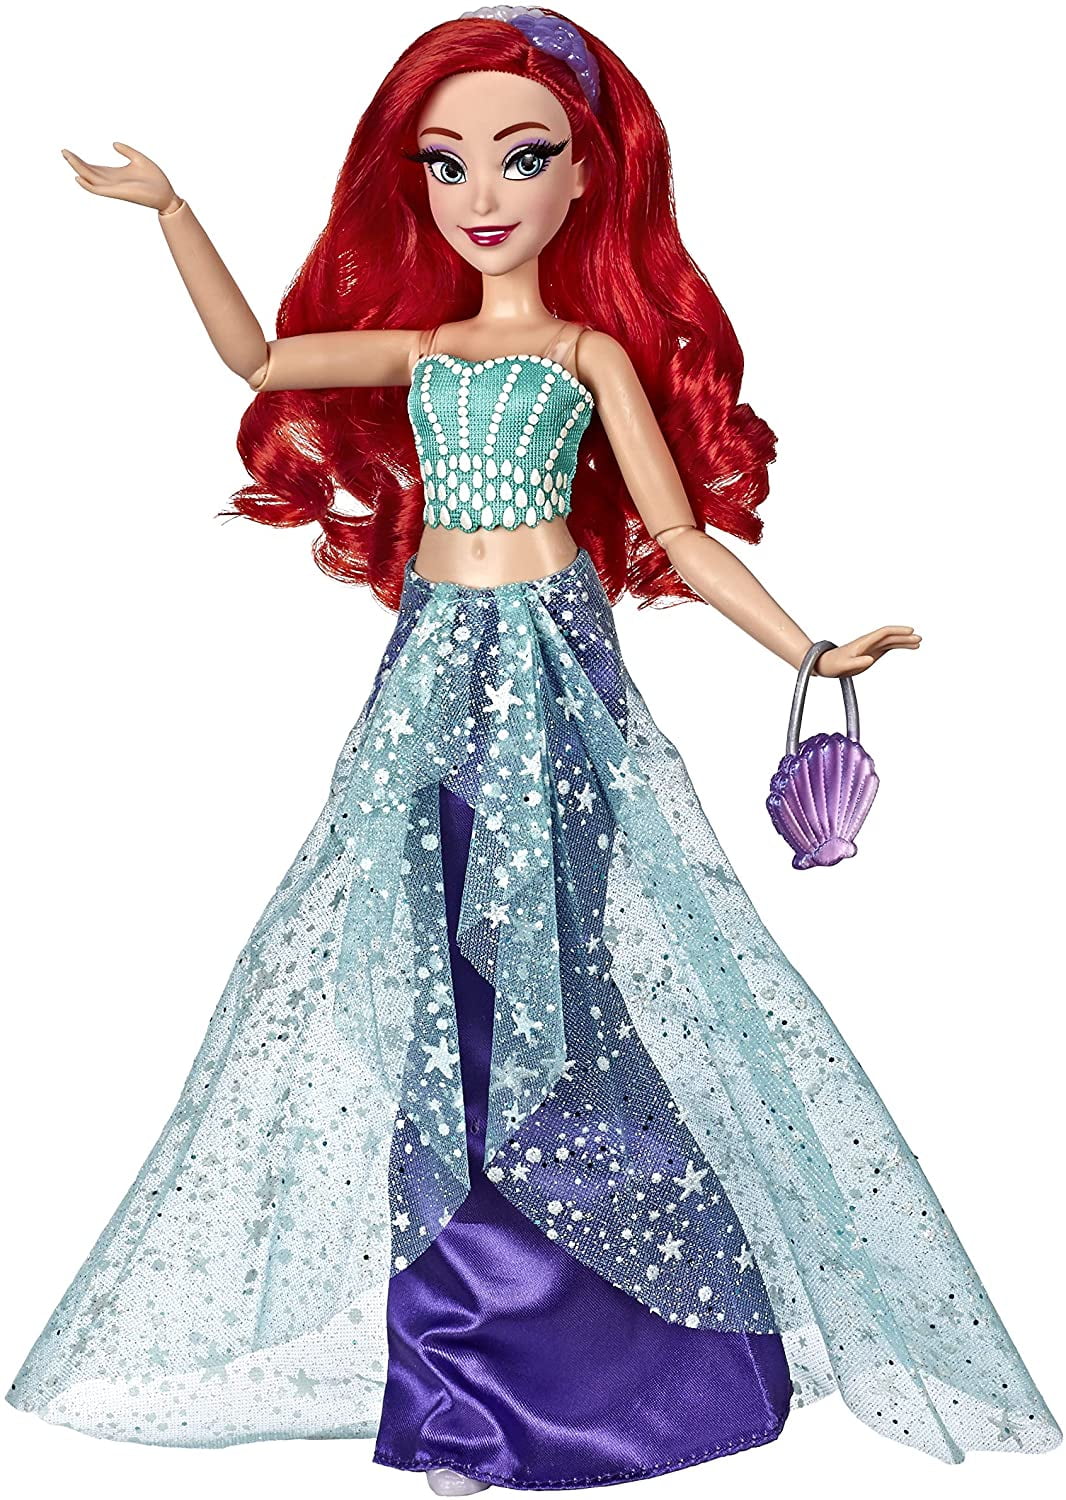 Contemporary Style with Purse and Shoes Disney Princess Style Series Ariel Doll 